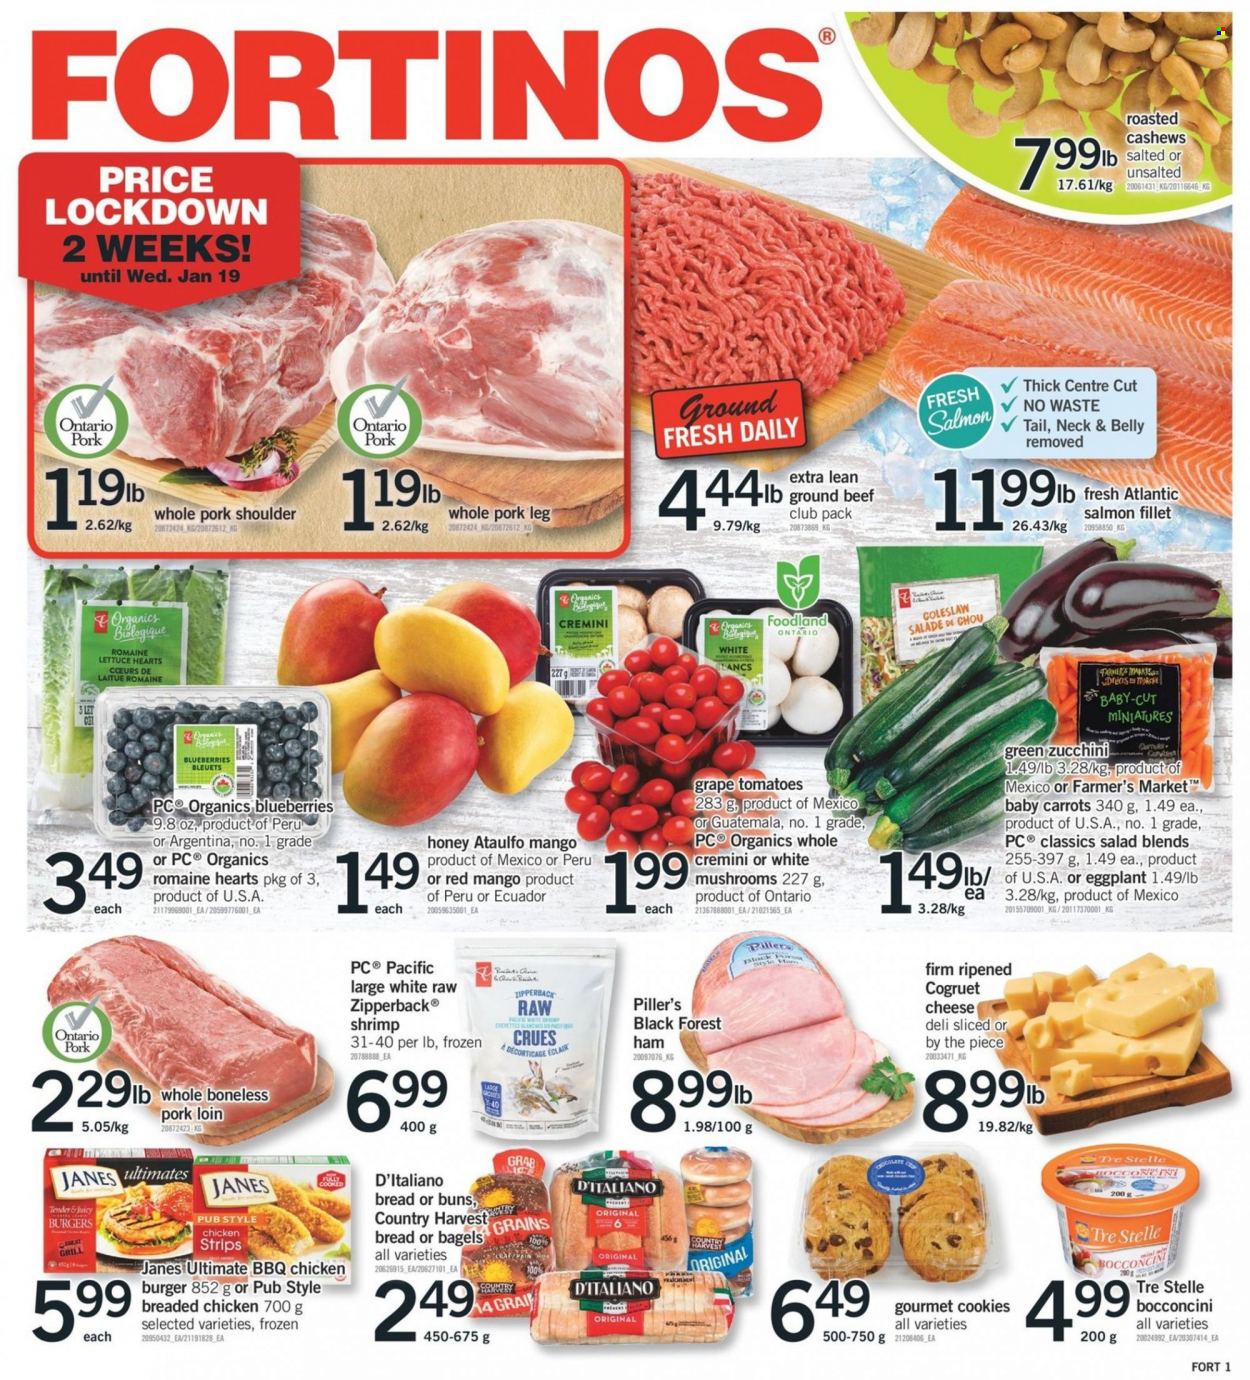 thumbnail - Fortinos Flyer - January 13, 2022 - January 19, 2022 - Sales products - mushrooms, bagels, bread, buns, carrots, tomatoes, zucchini, lettuce, salad, eggplant, blueberries, mango, salmon, salmon fillet, shrimps, coleslaw, hamburger, fried chicken, ham, bocconcini, cheese, Country Harvest, strips, cookies, honey, cashews, beef meat, ground beef, pork loin, pork meat, pork shoulder, pork leg, grill. Page 1.